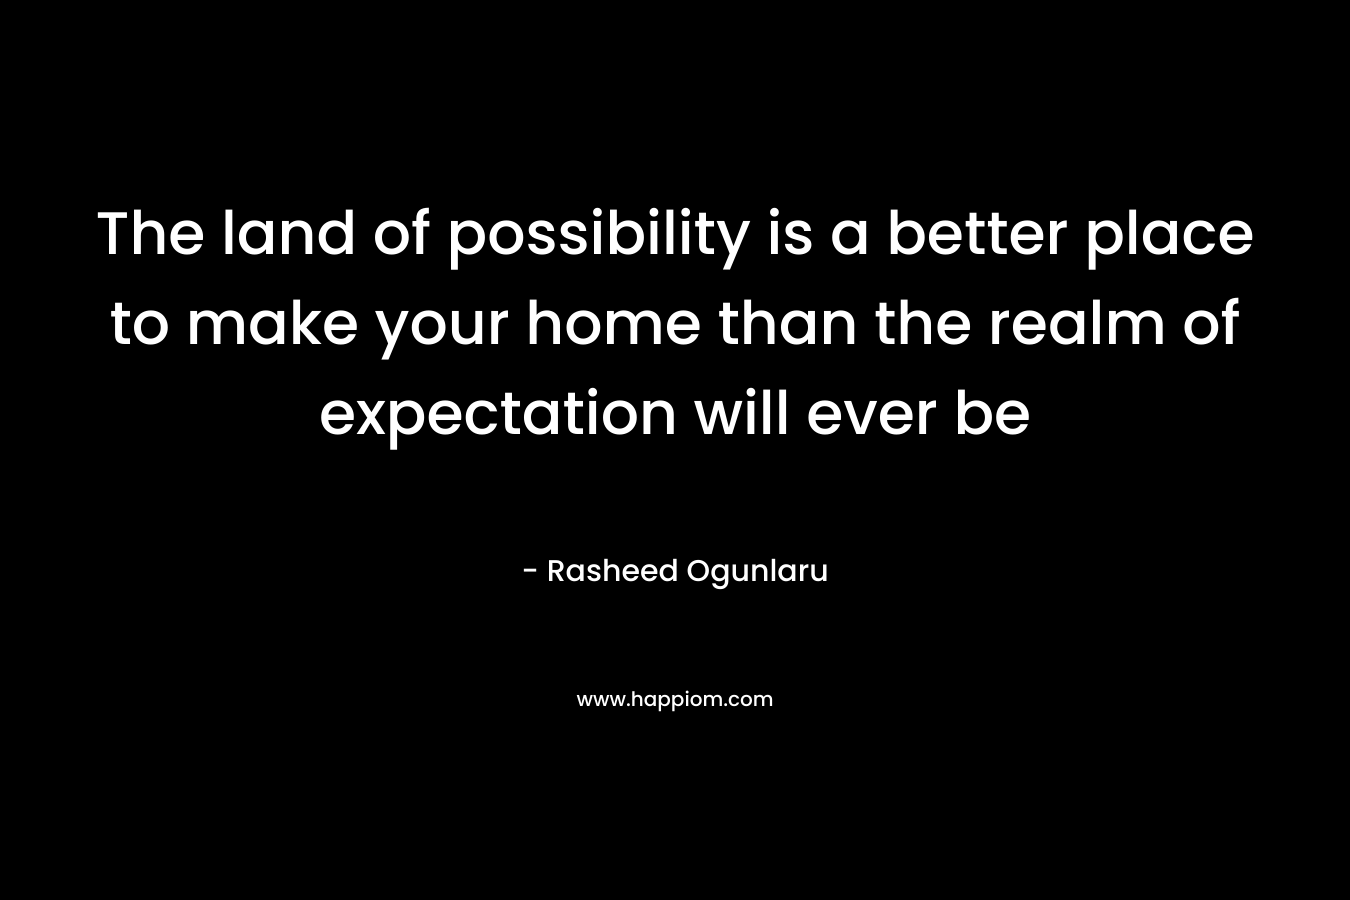 The land of possibility is a better place to make your home than the realm of expectation will ever be – Rasheed Ogunlaru